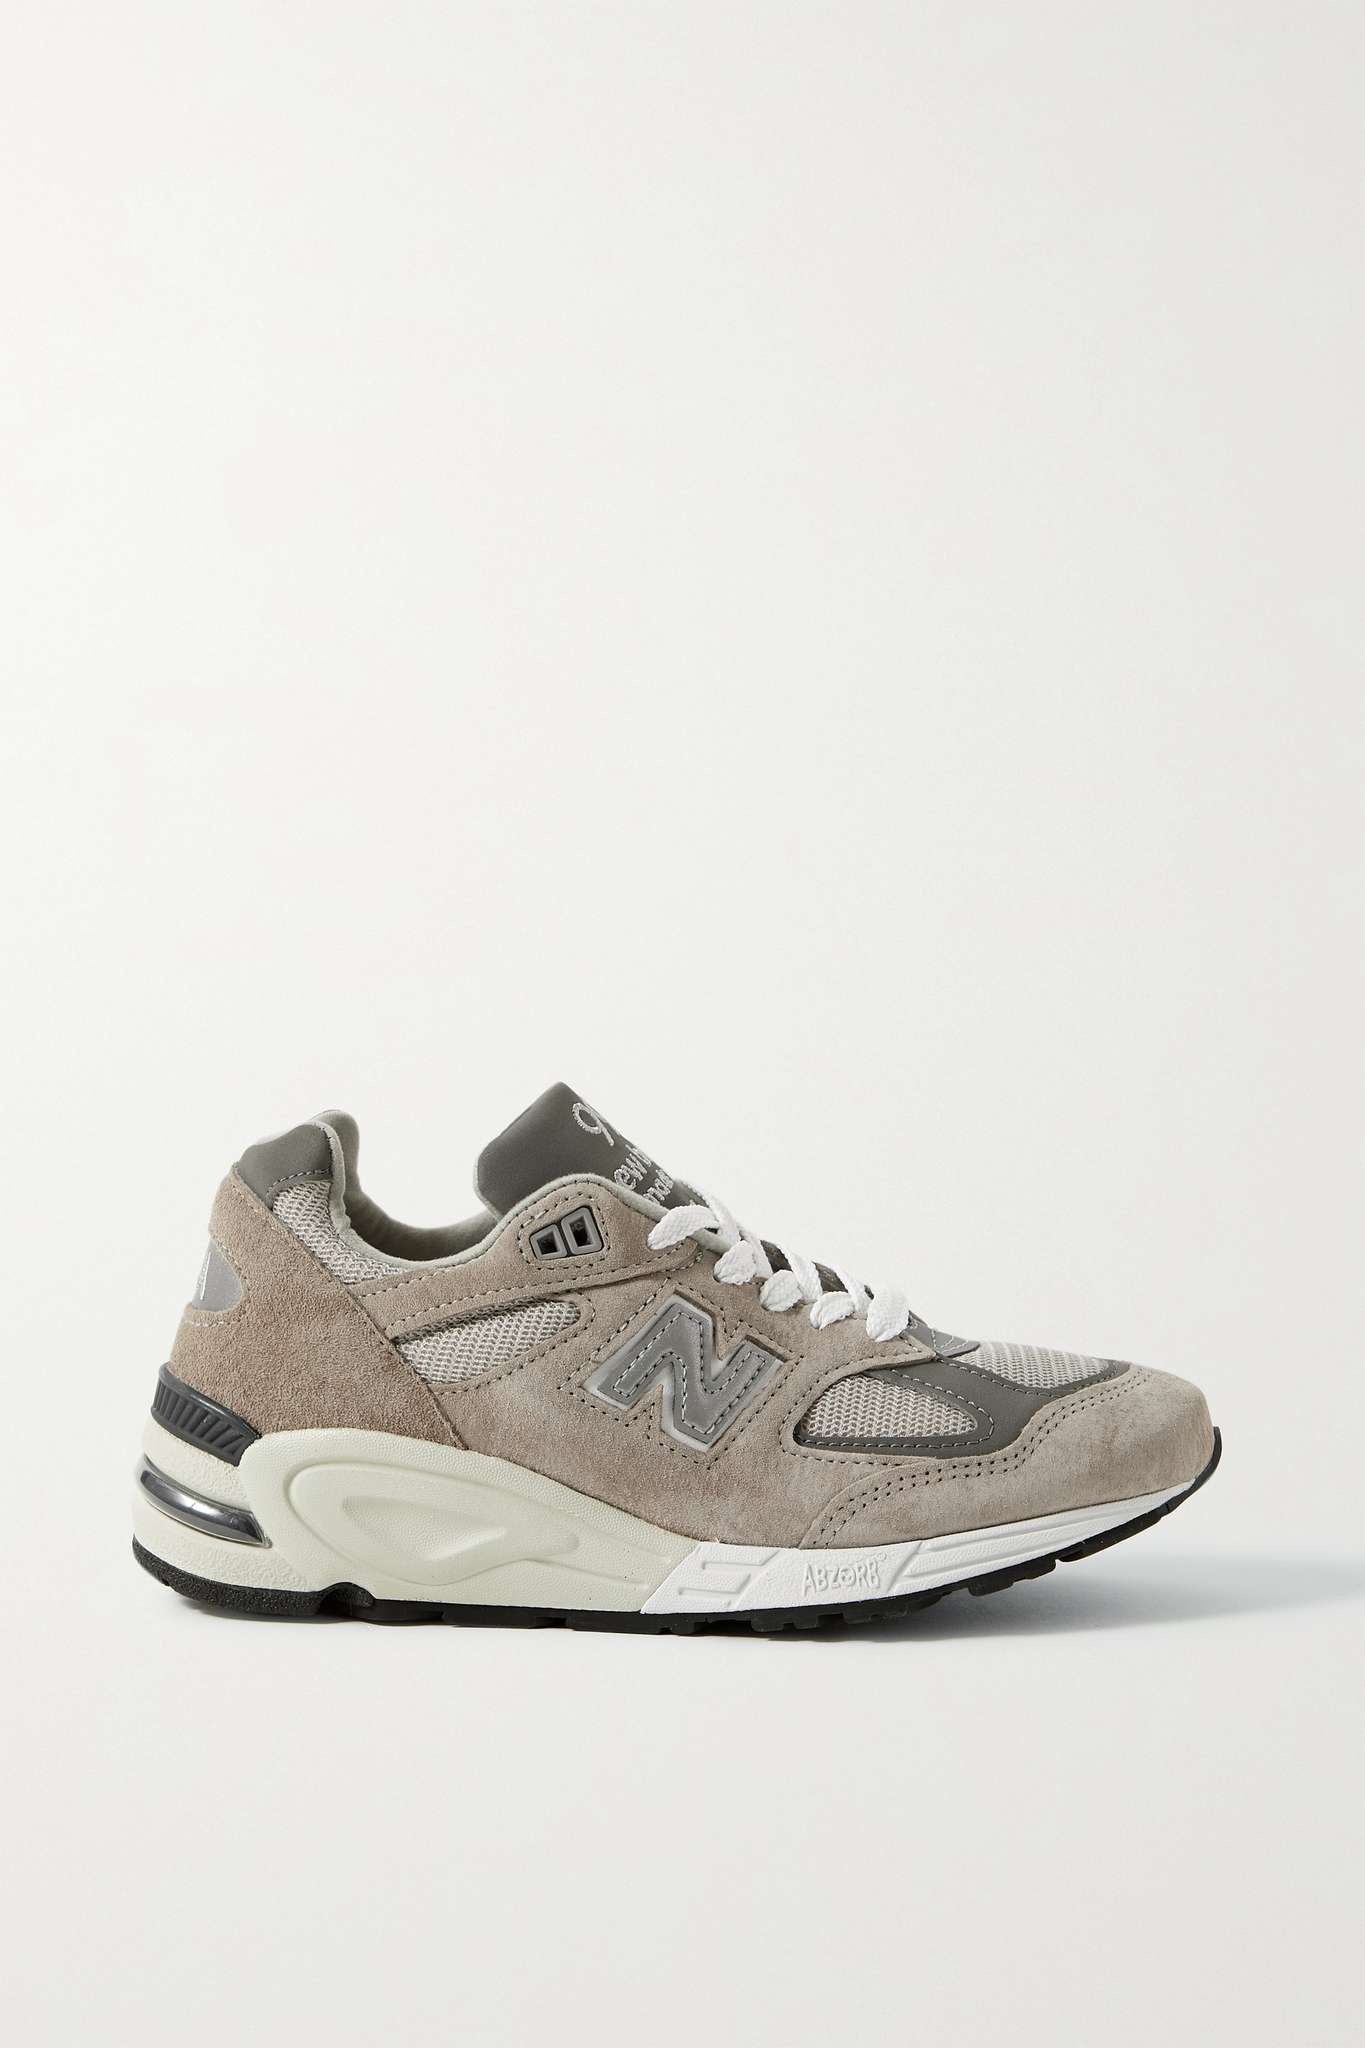 M990v2 suede and mesh sneakers - 1